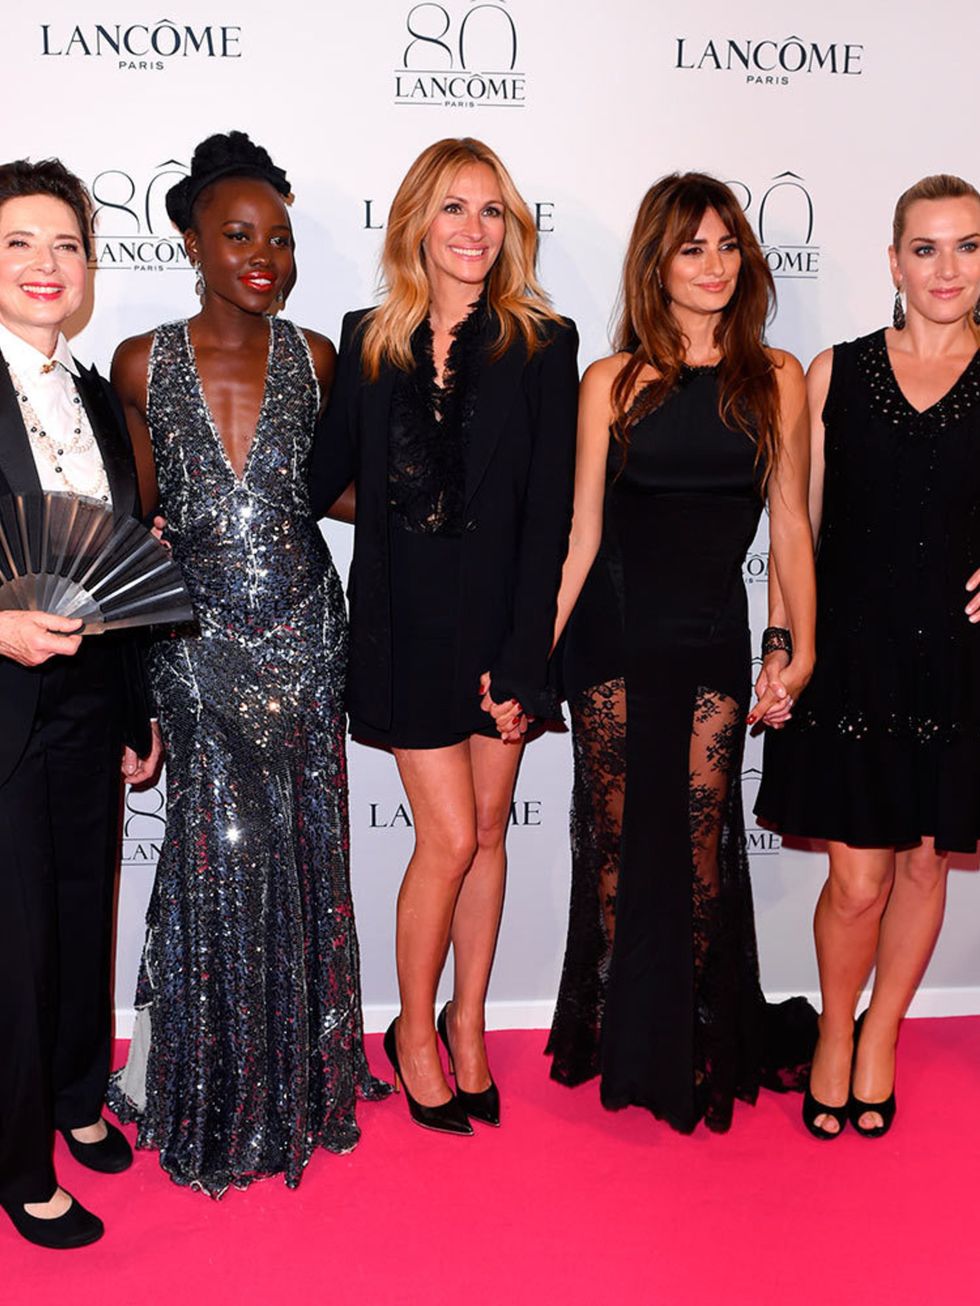 Isabella Rossellini, Lupita Nyong'o, Julia Roberts, Penelope Cruz and Kate Winslet attend the Lancôme 80th Anniversary celebration during the Paris Haute Couture a/w 2015 shows in Paris, July 2015.